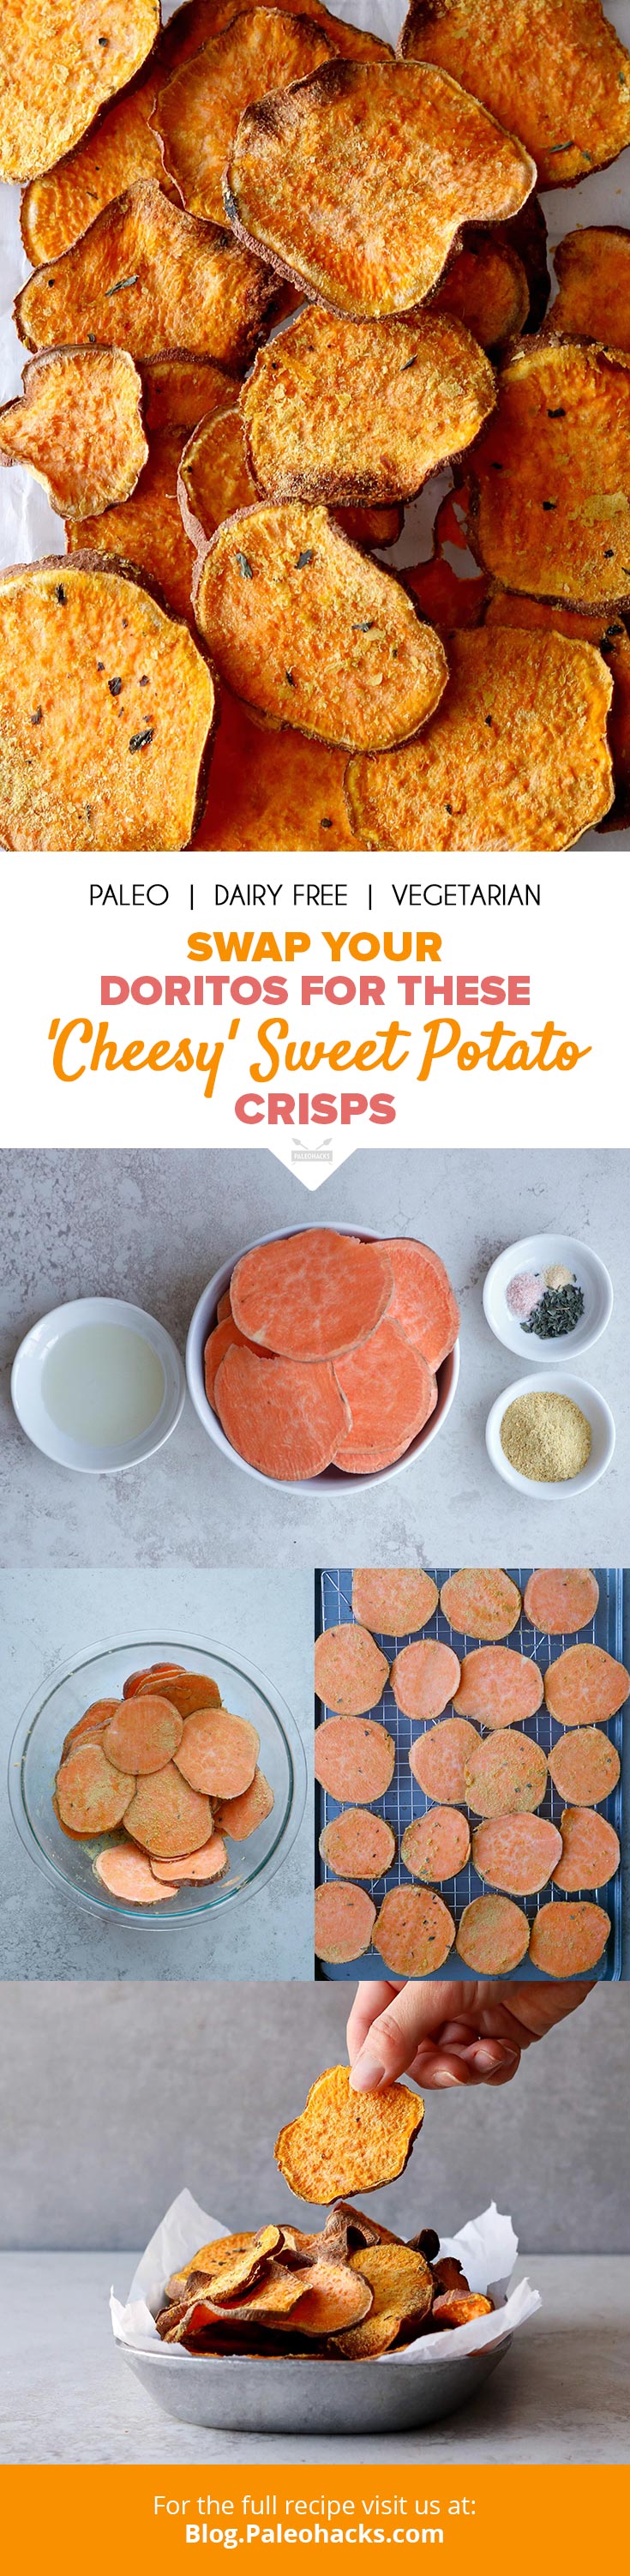 Craving potato chips? These sweet potato crisps are coated in cheesy nutritional yeast and dried herbs for flavorful munchies with no frying necessary.